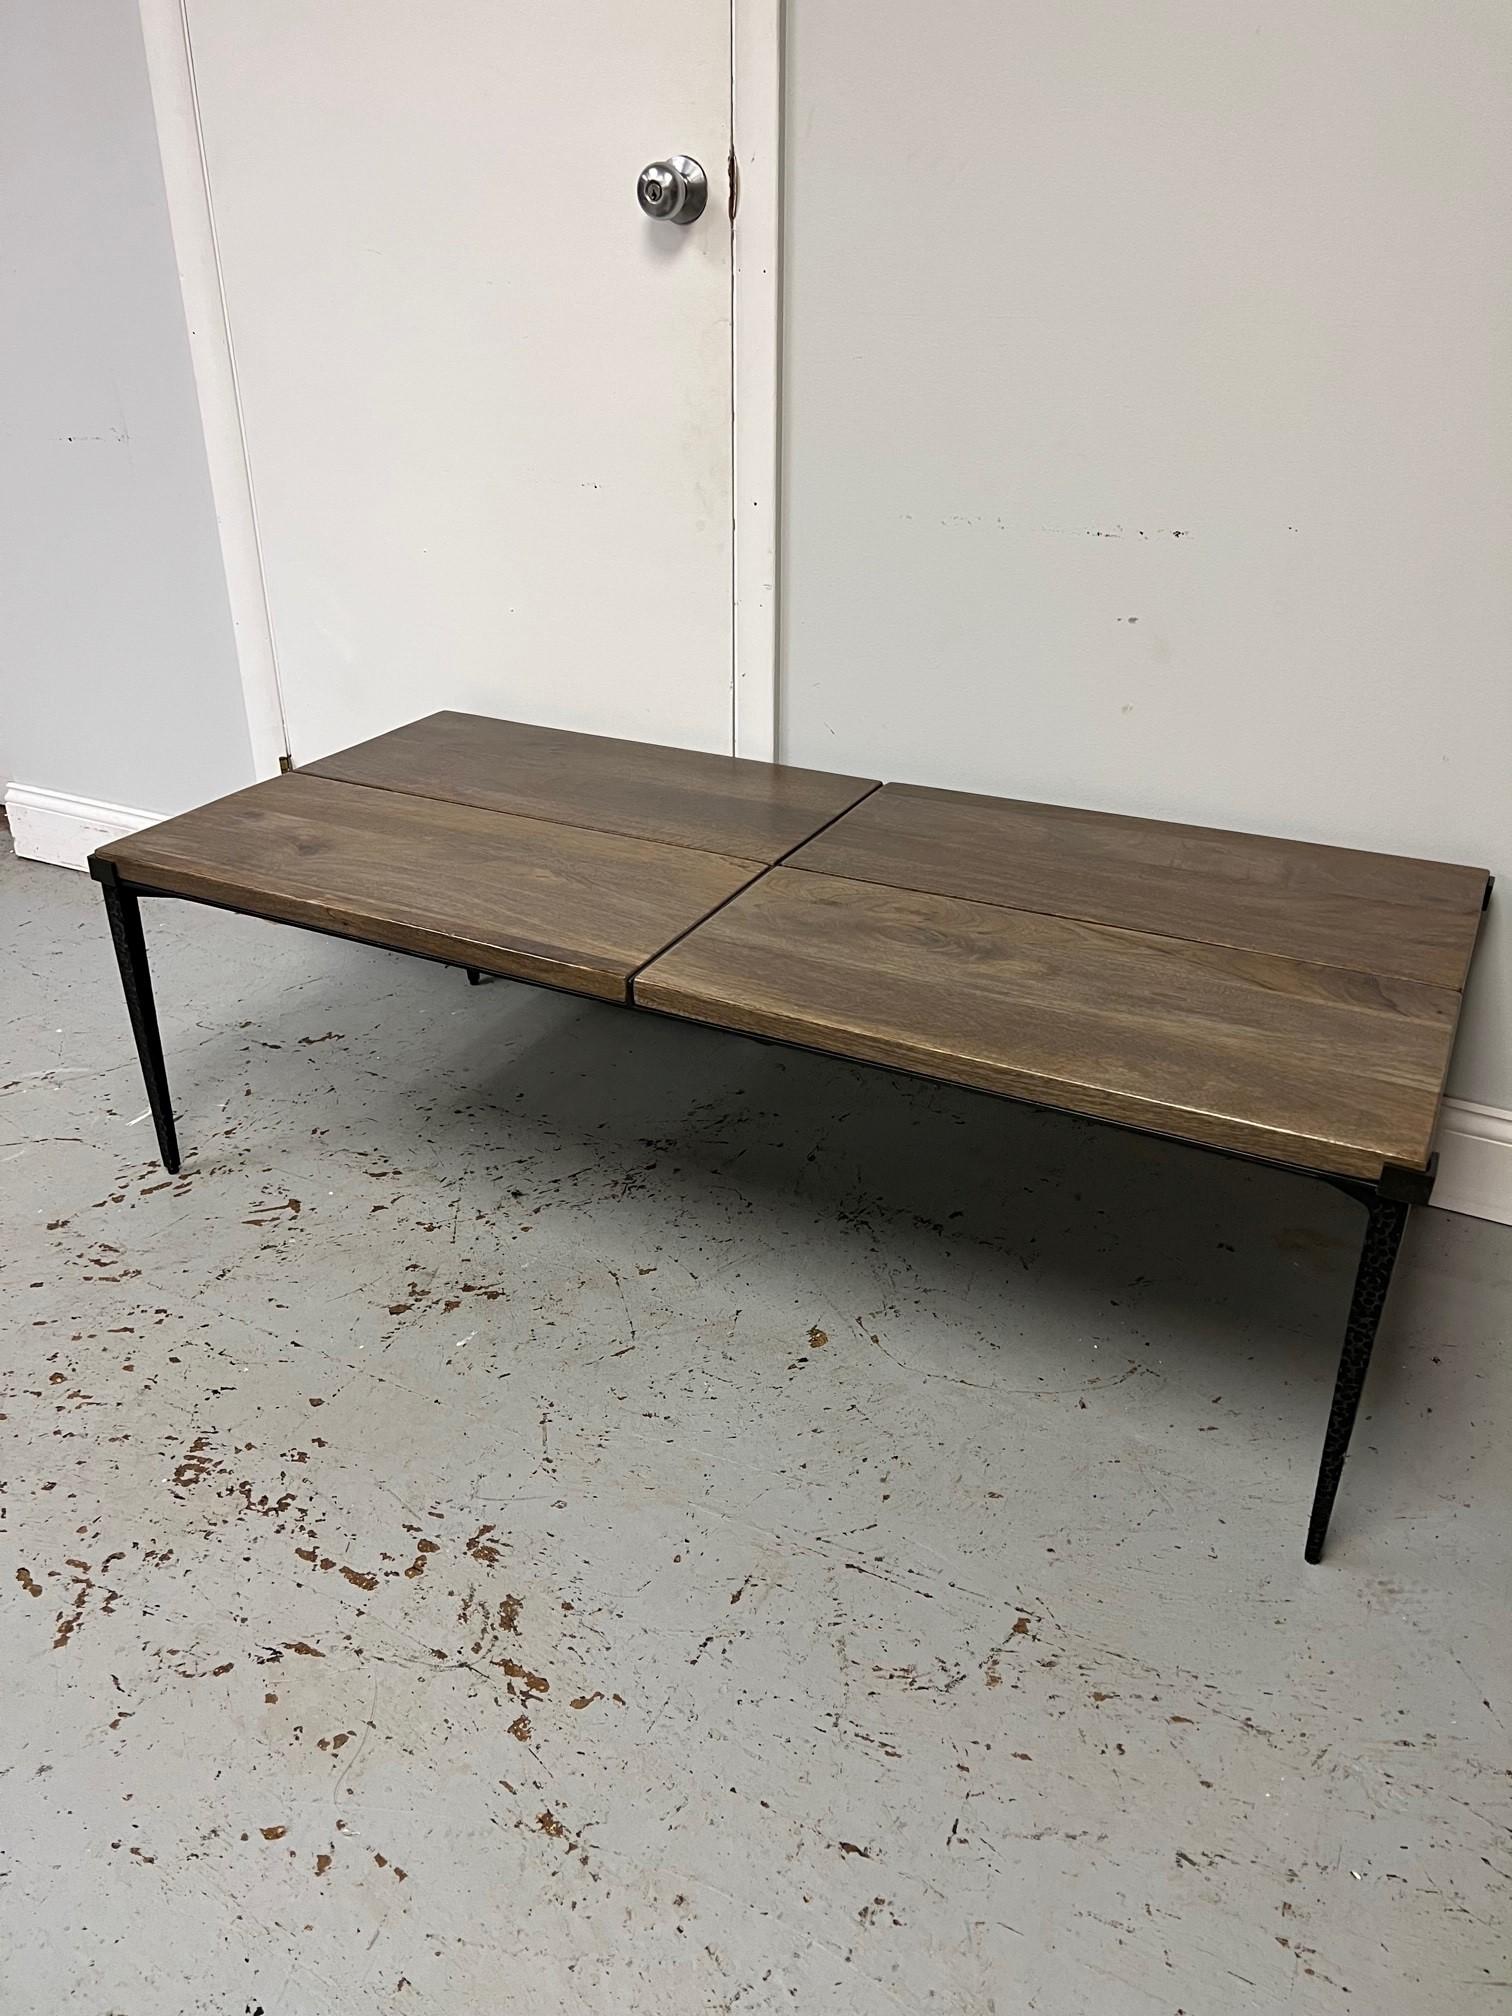 This is a great iron and wood coffee table imported from India. With its thin decorative iron legs and four hard wood panels it has a good look. The legs are thin but are very sturdy you can sit on this coffee table. It is a used piece and has some